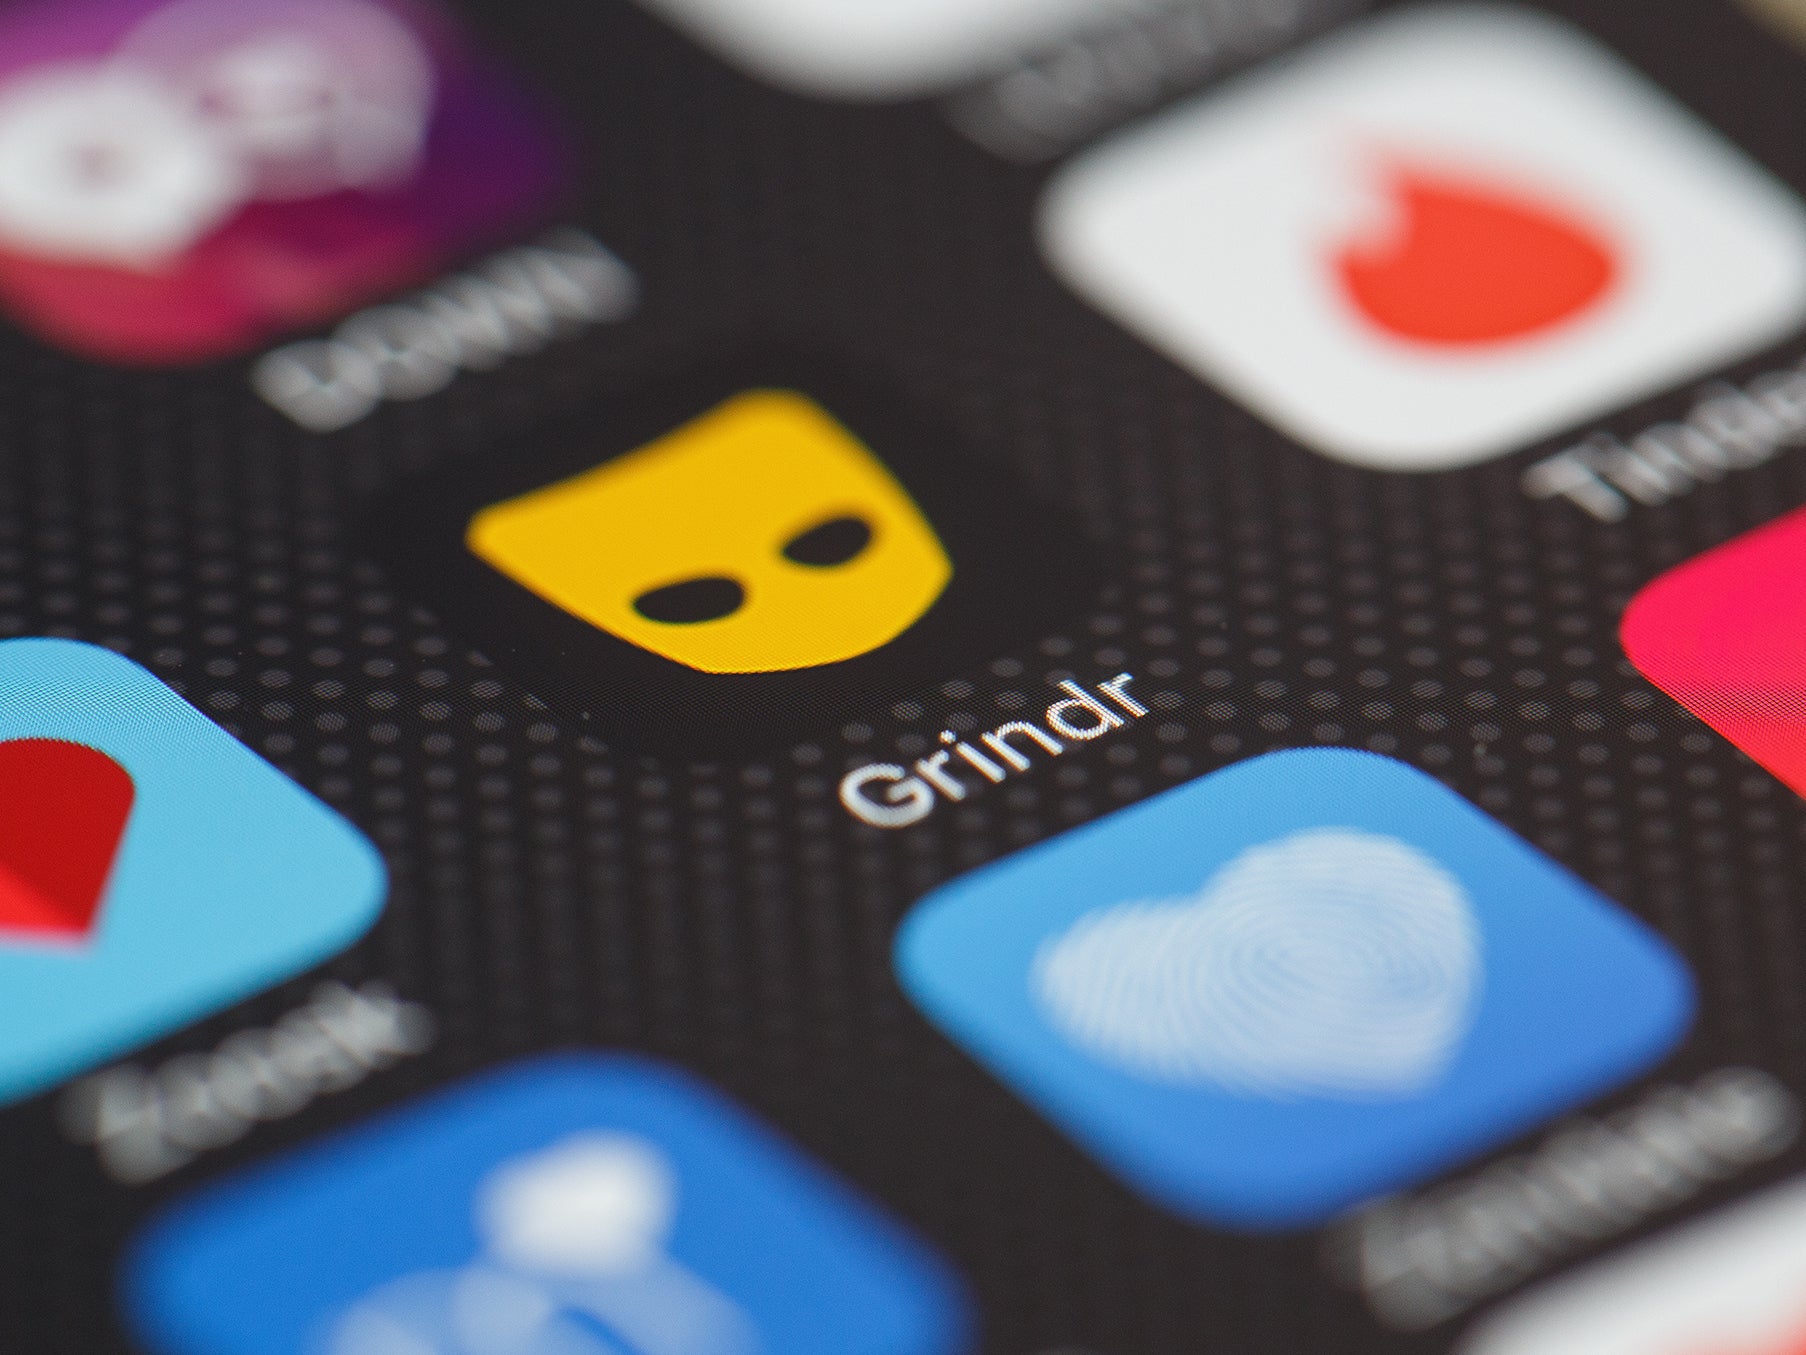 Grindr is dating app for gay, bi, trans and queer people